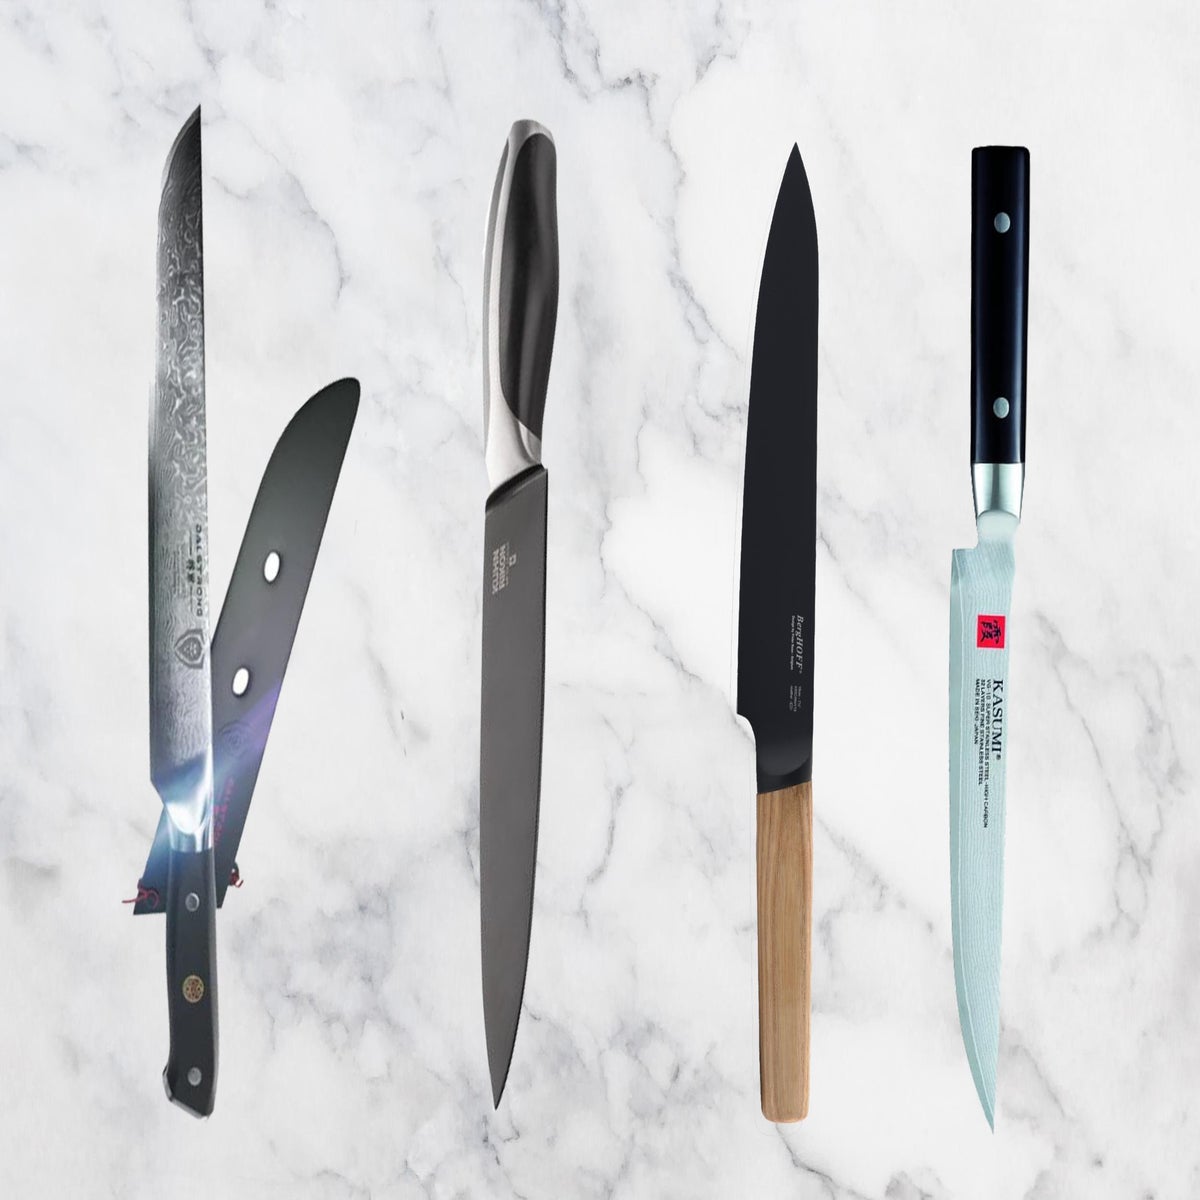 https://static.independent.co.uk/s3fs-public/thumbnails/image/2019/10/14/17/best-carving-knives-indybest-0.jpg?width=1200&height=1200&fit=crop